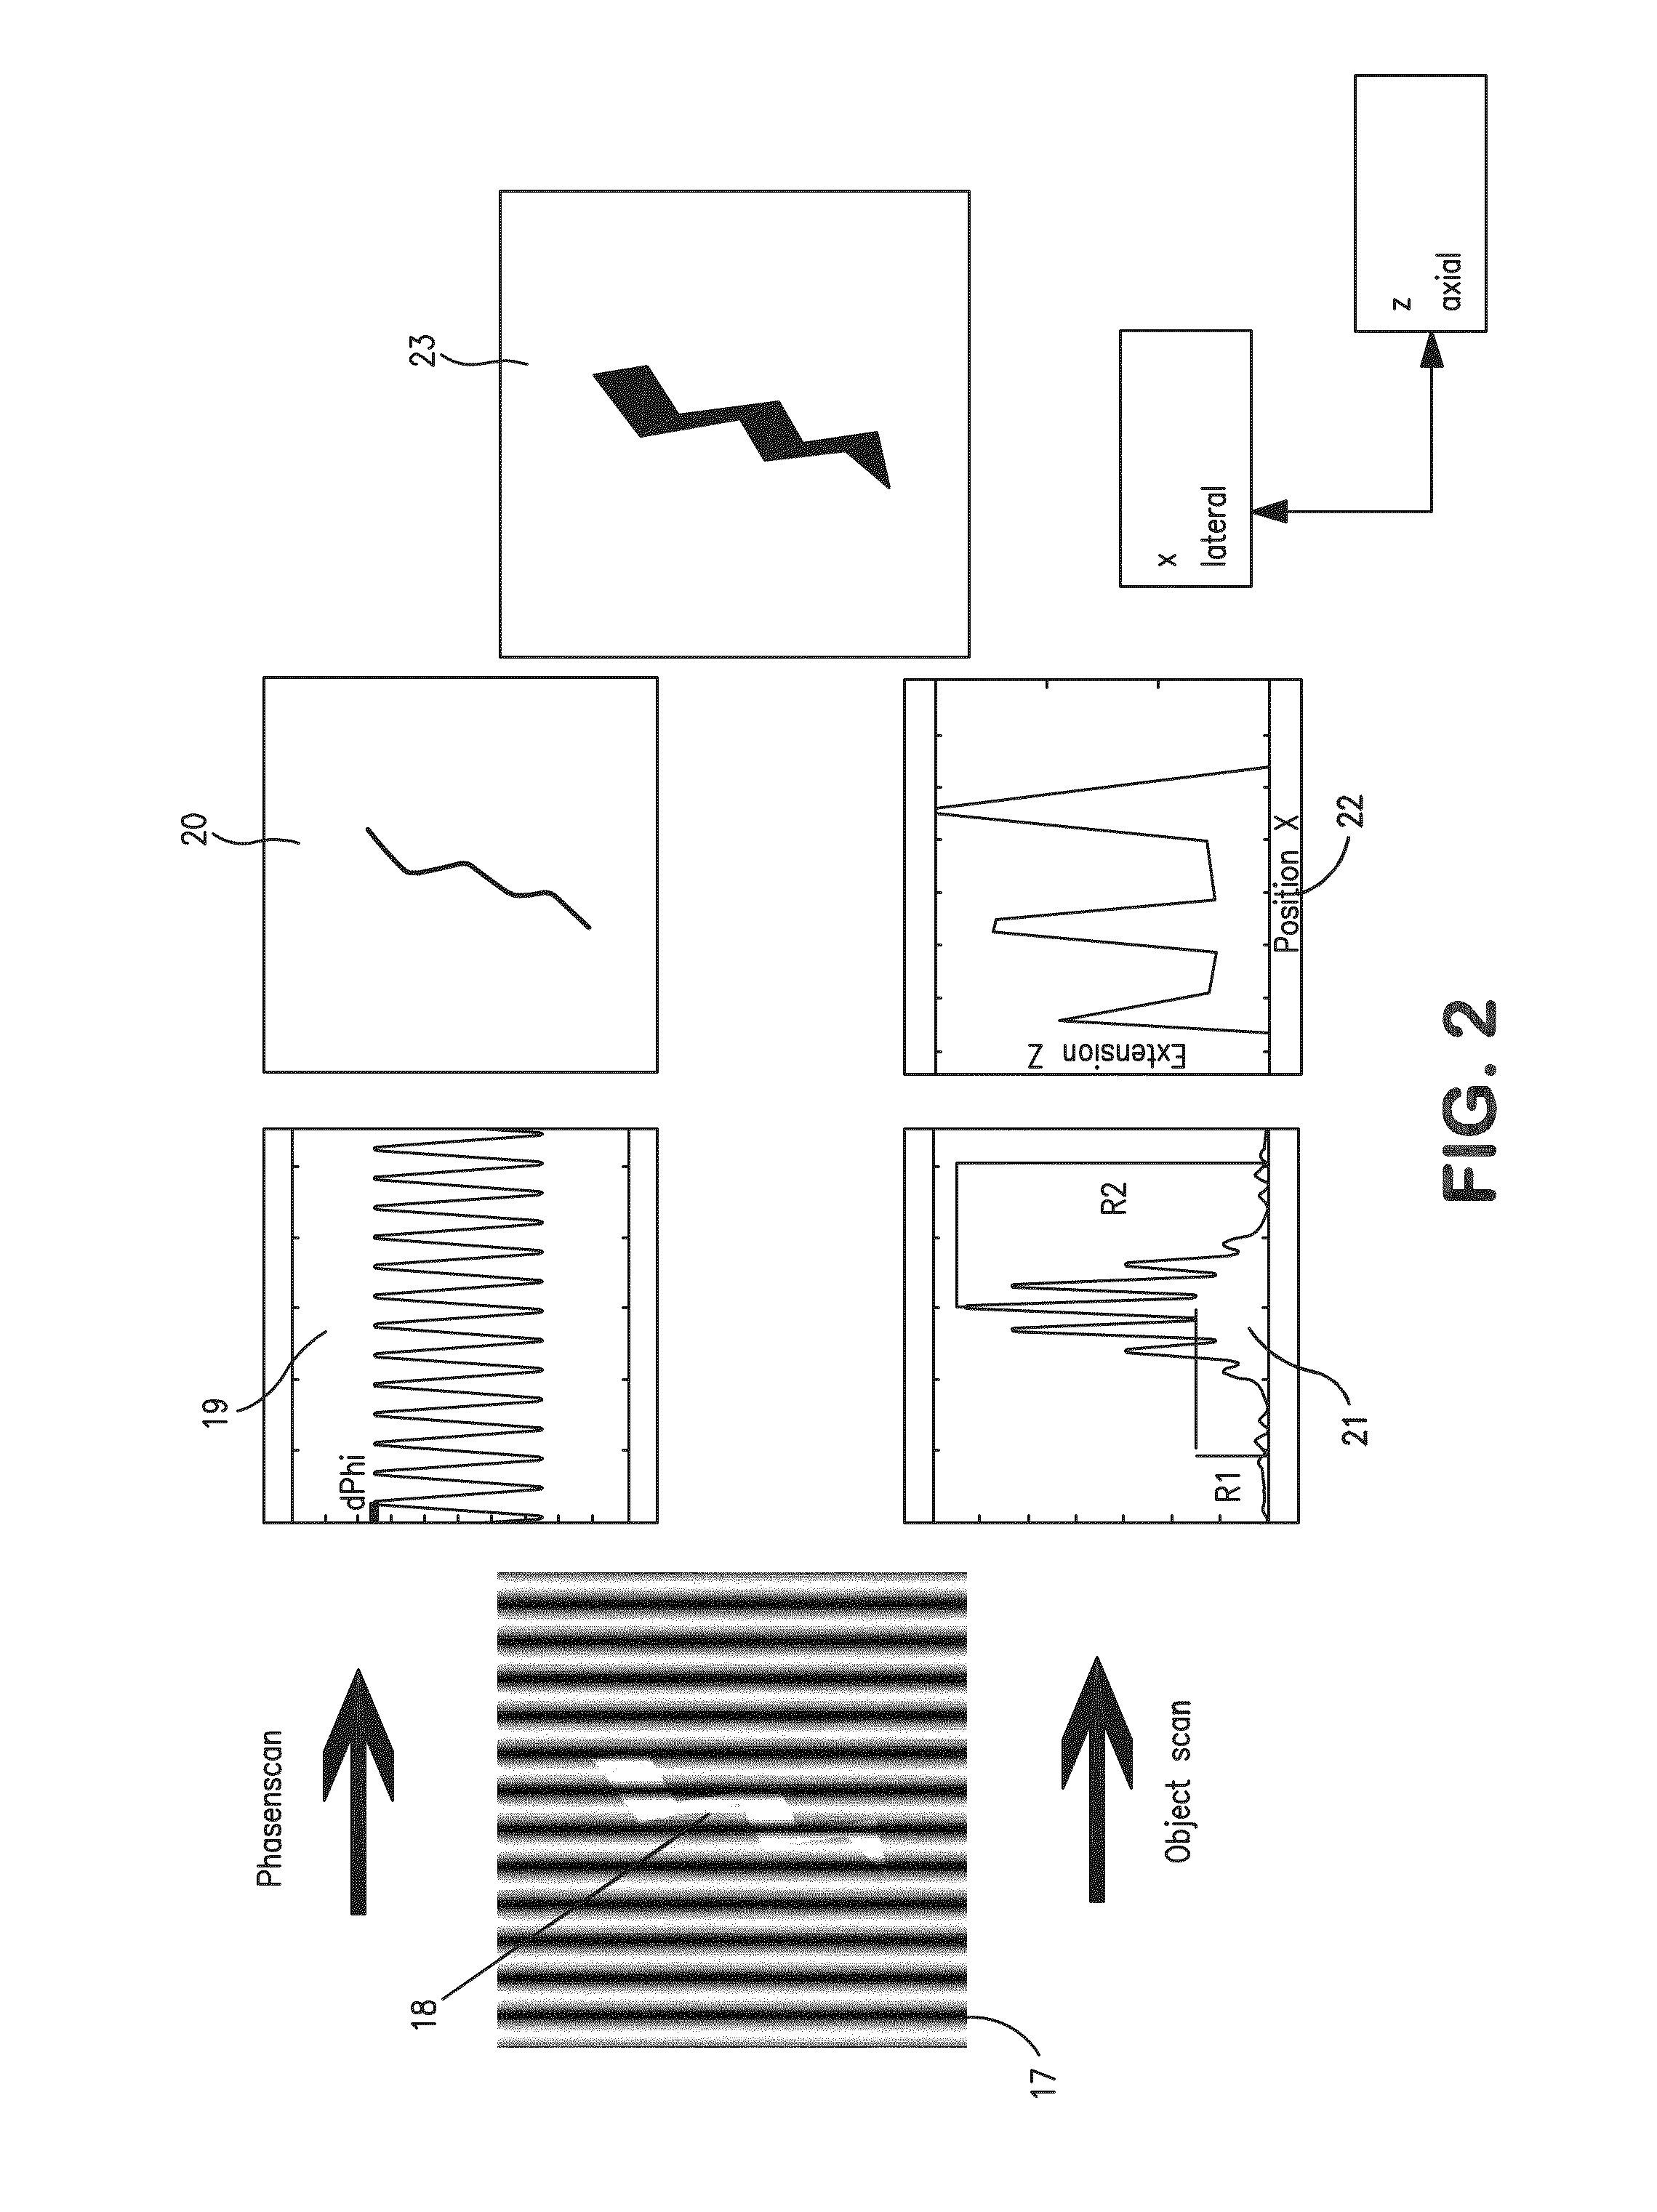 Method and an apparatus for localization of single dye molecules in the fluorescent microscopy